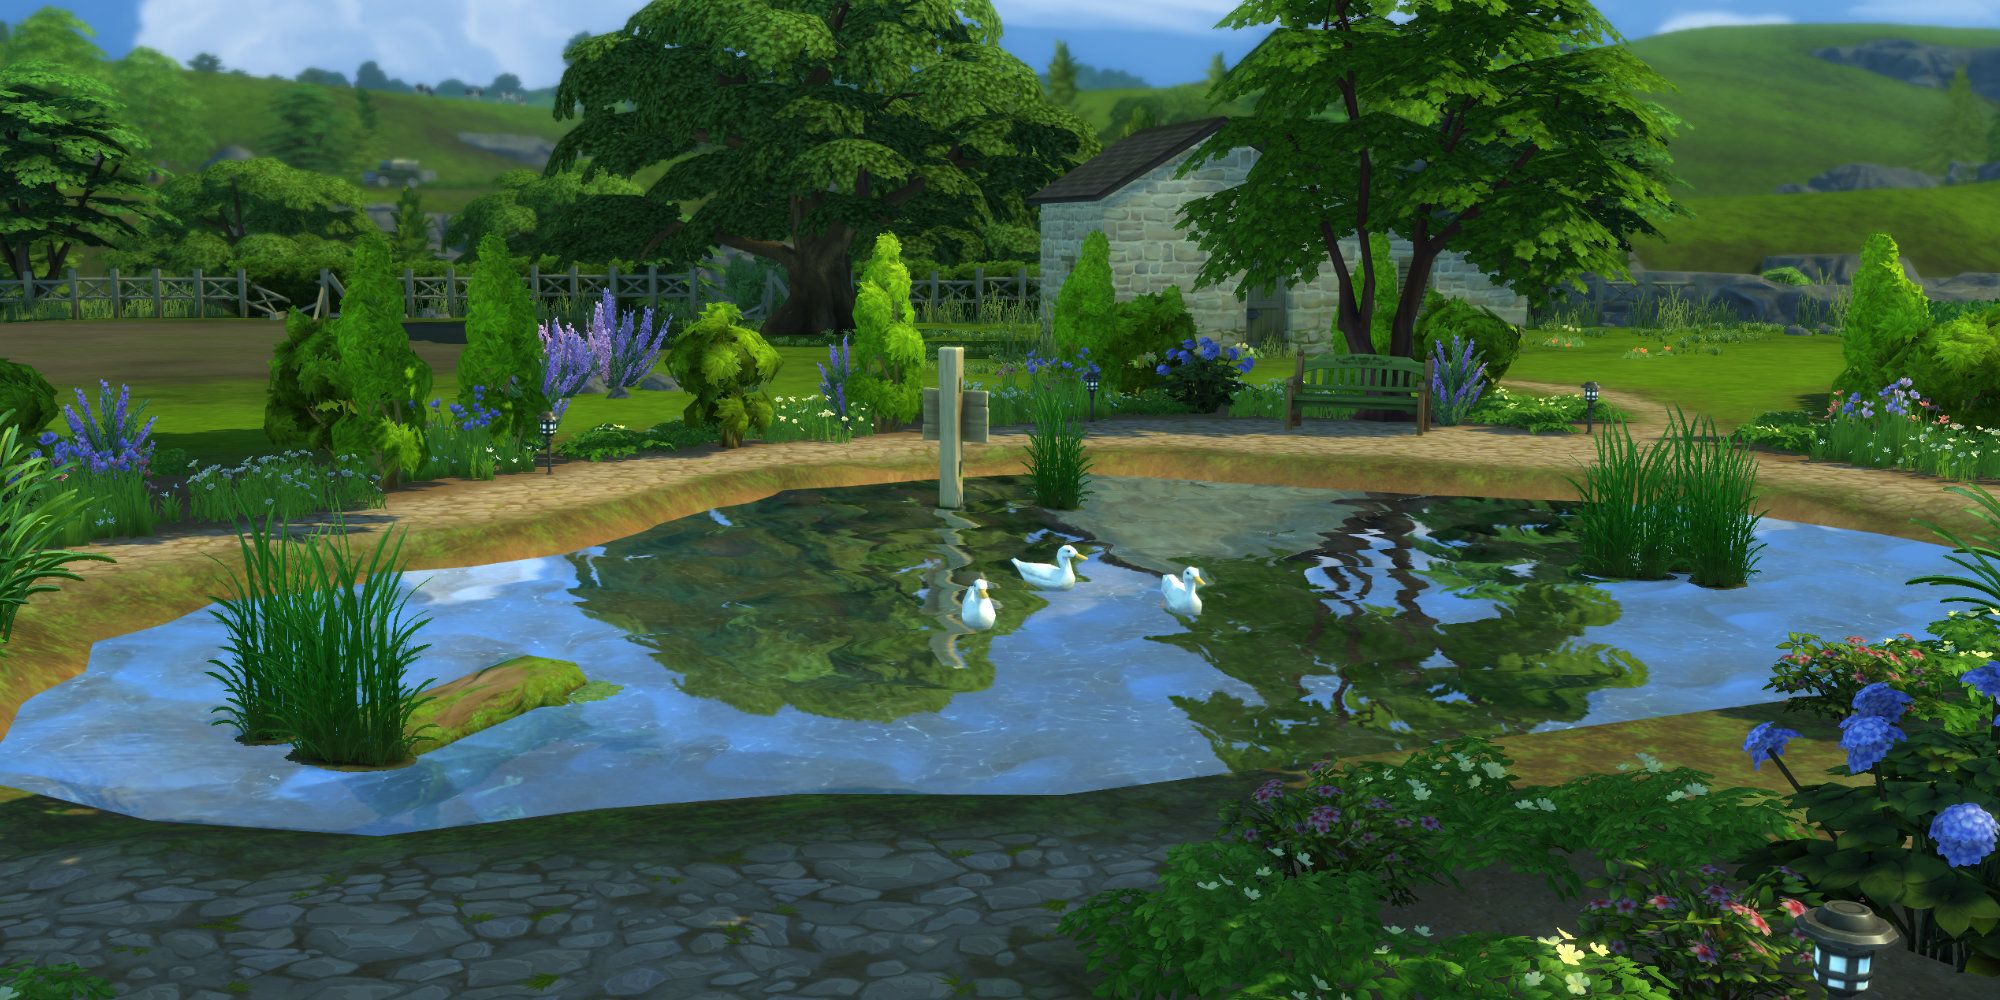 SIms 4 cottage living duckpond